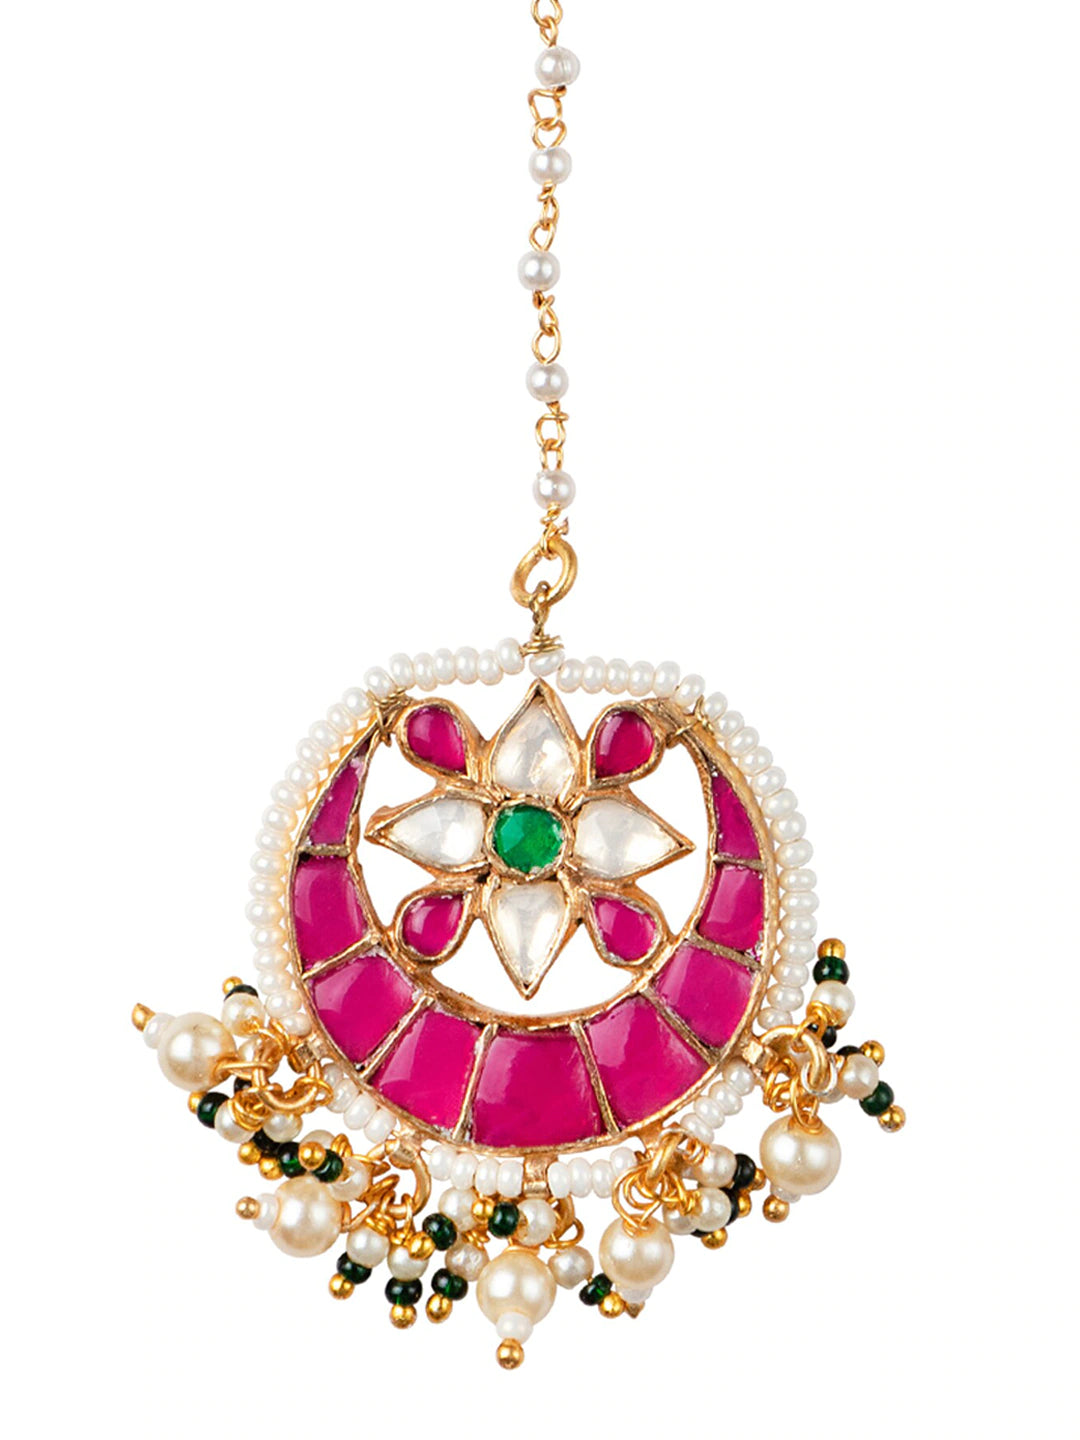 Women's 24K Gold-Plated Pink & White Kundan-Studded Pearl Embellished Handcrafted Maang Tikka - Morkanth